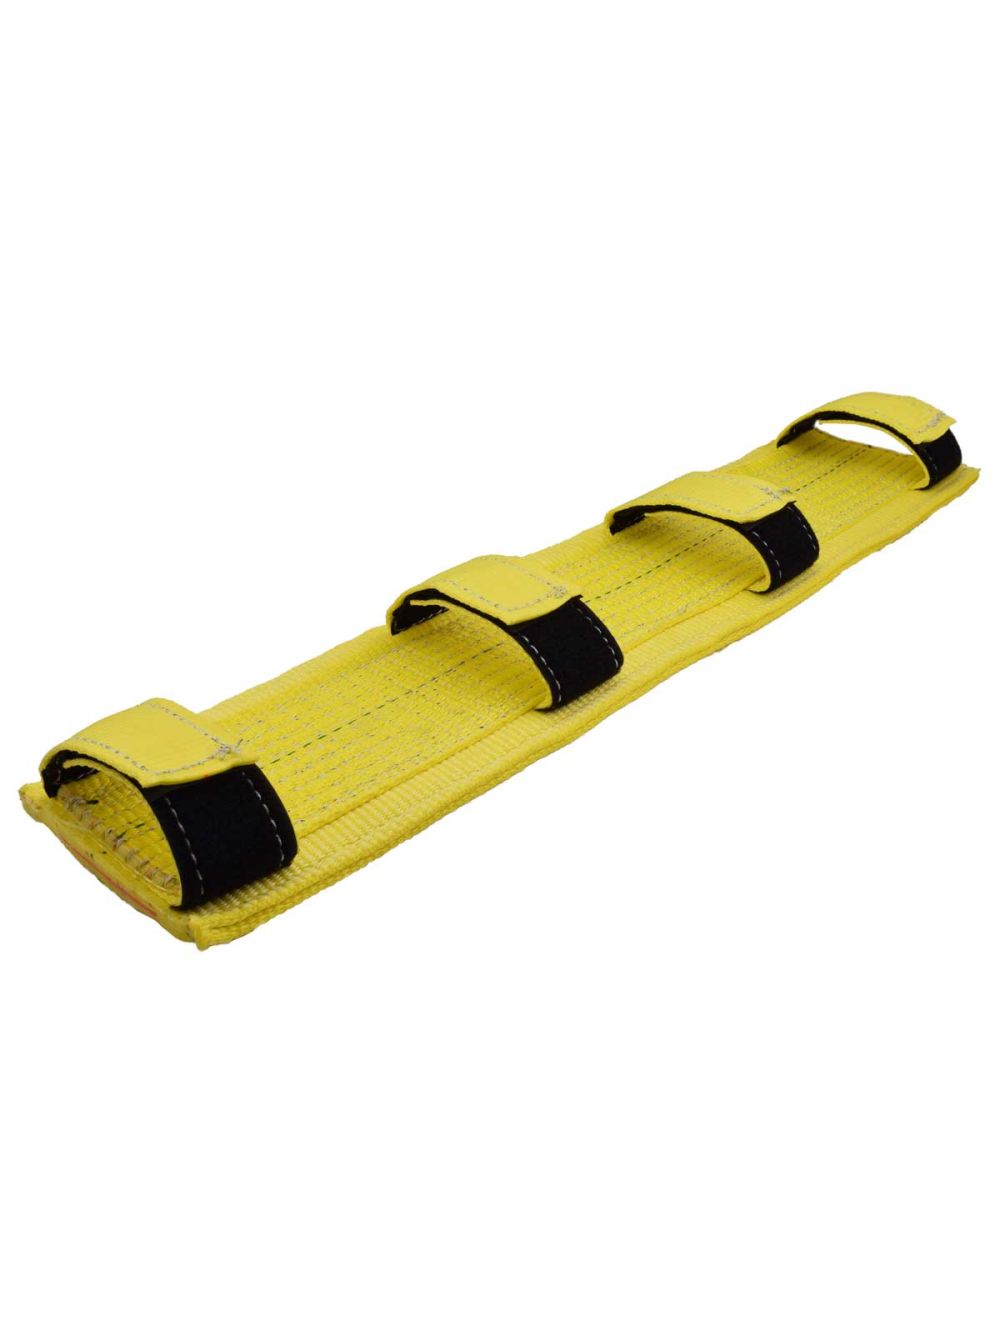 Vertical 25000 pounds per inch of Width LIF   SS16 Liftall SS16 Sling Shield Edge Protector